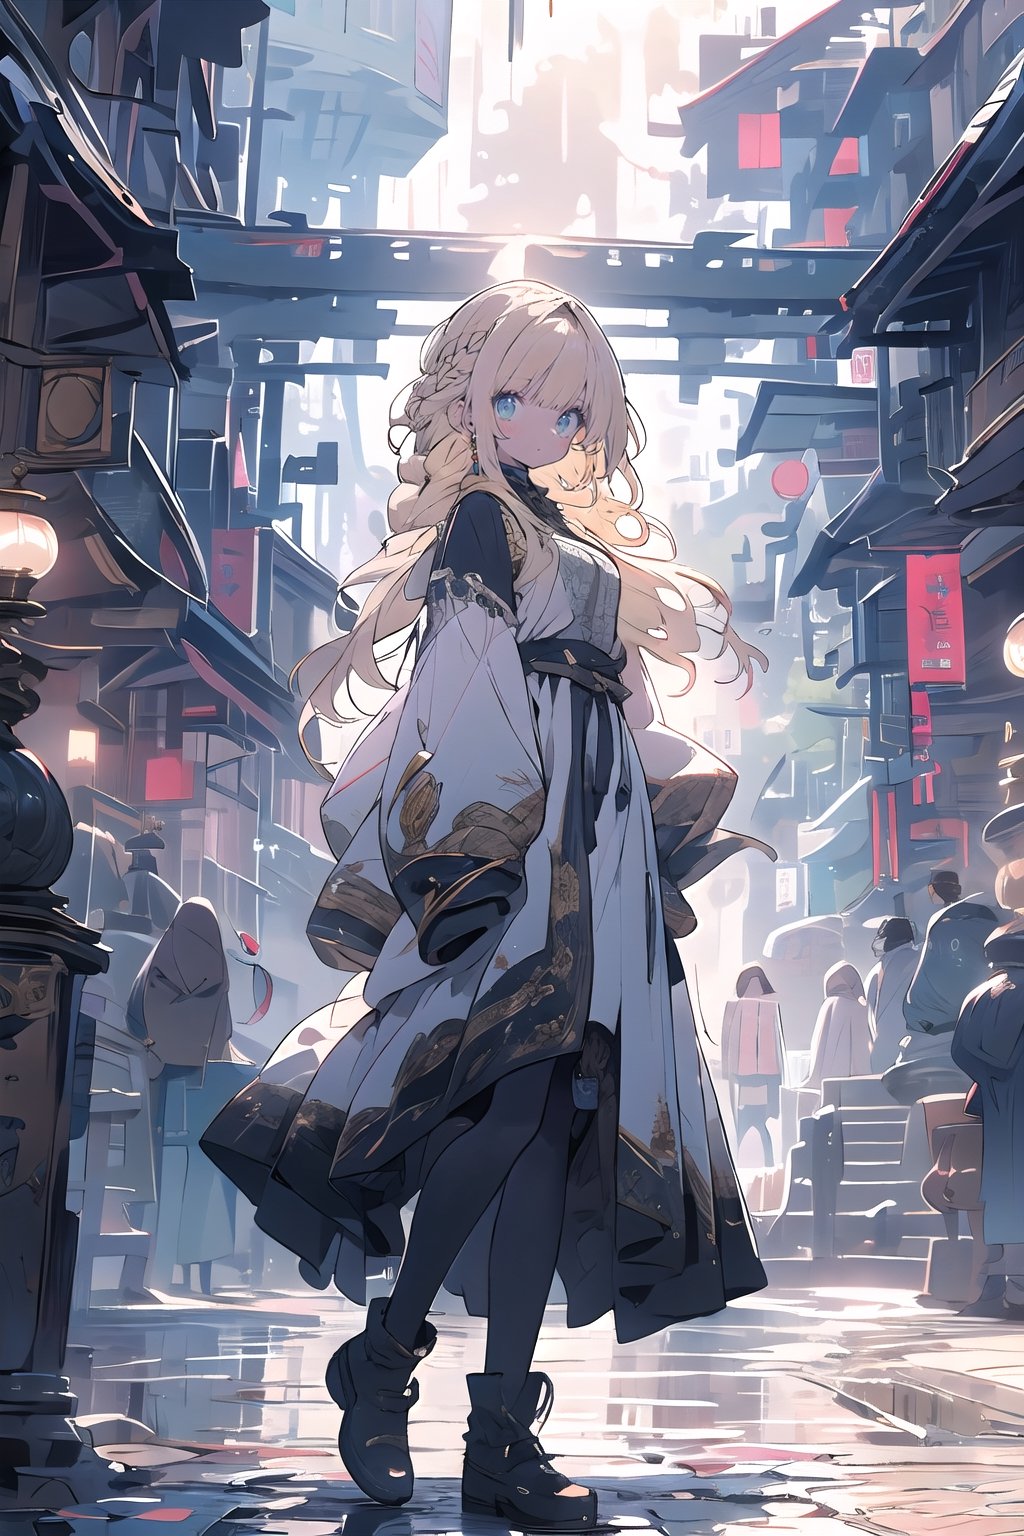 1girl, feminine girl, small face, big eyes, blonde,blond_hair,high detail eyes, slimm body, waterfall braid hairstyle, white gown with gold tones,

medieval town, noon, sun light, vivid light, town square,dancing , old medieval village,

High detailed, , (xx)1man, masterpiece, best quality, 8K, highres, absurdres:1.2, masterpiece, best quality, ultra-detailed, illustration,

(multiple views, full body, upper body, reference sheet:1), ,midjourney, niji,masterpiece,